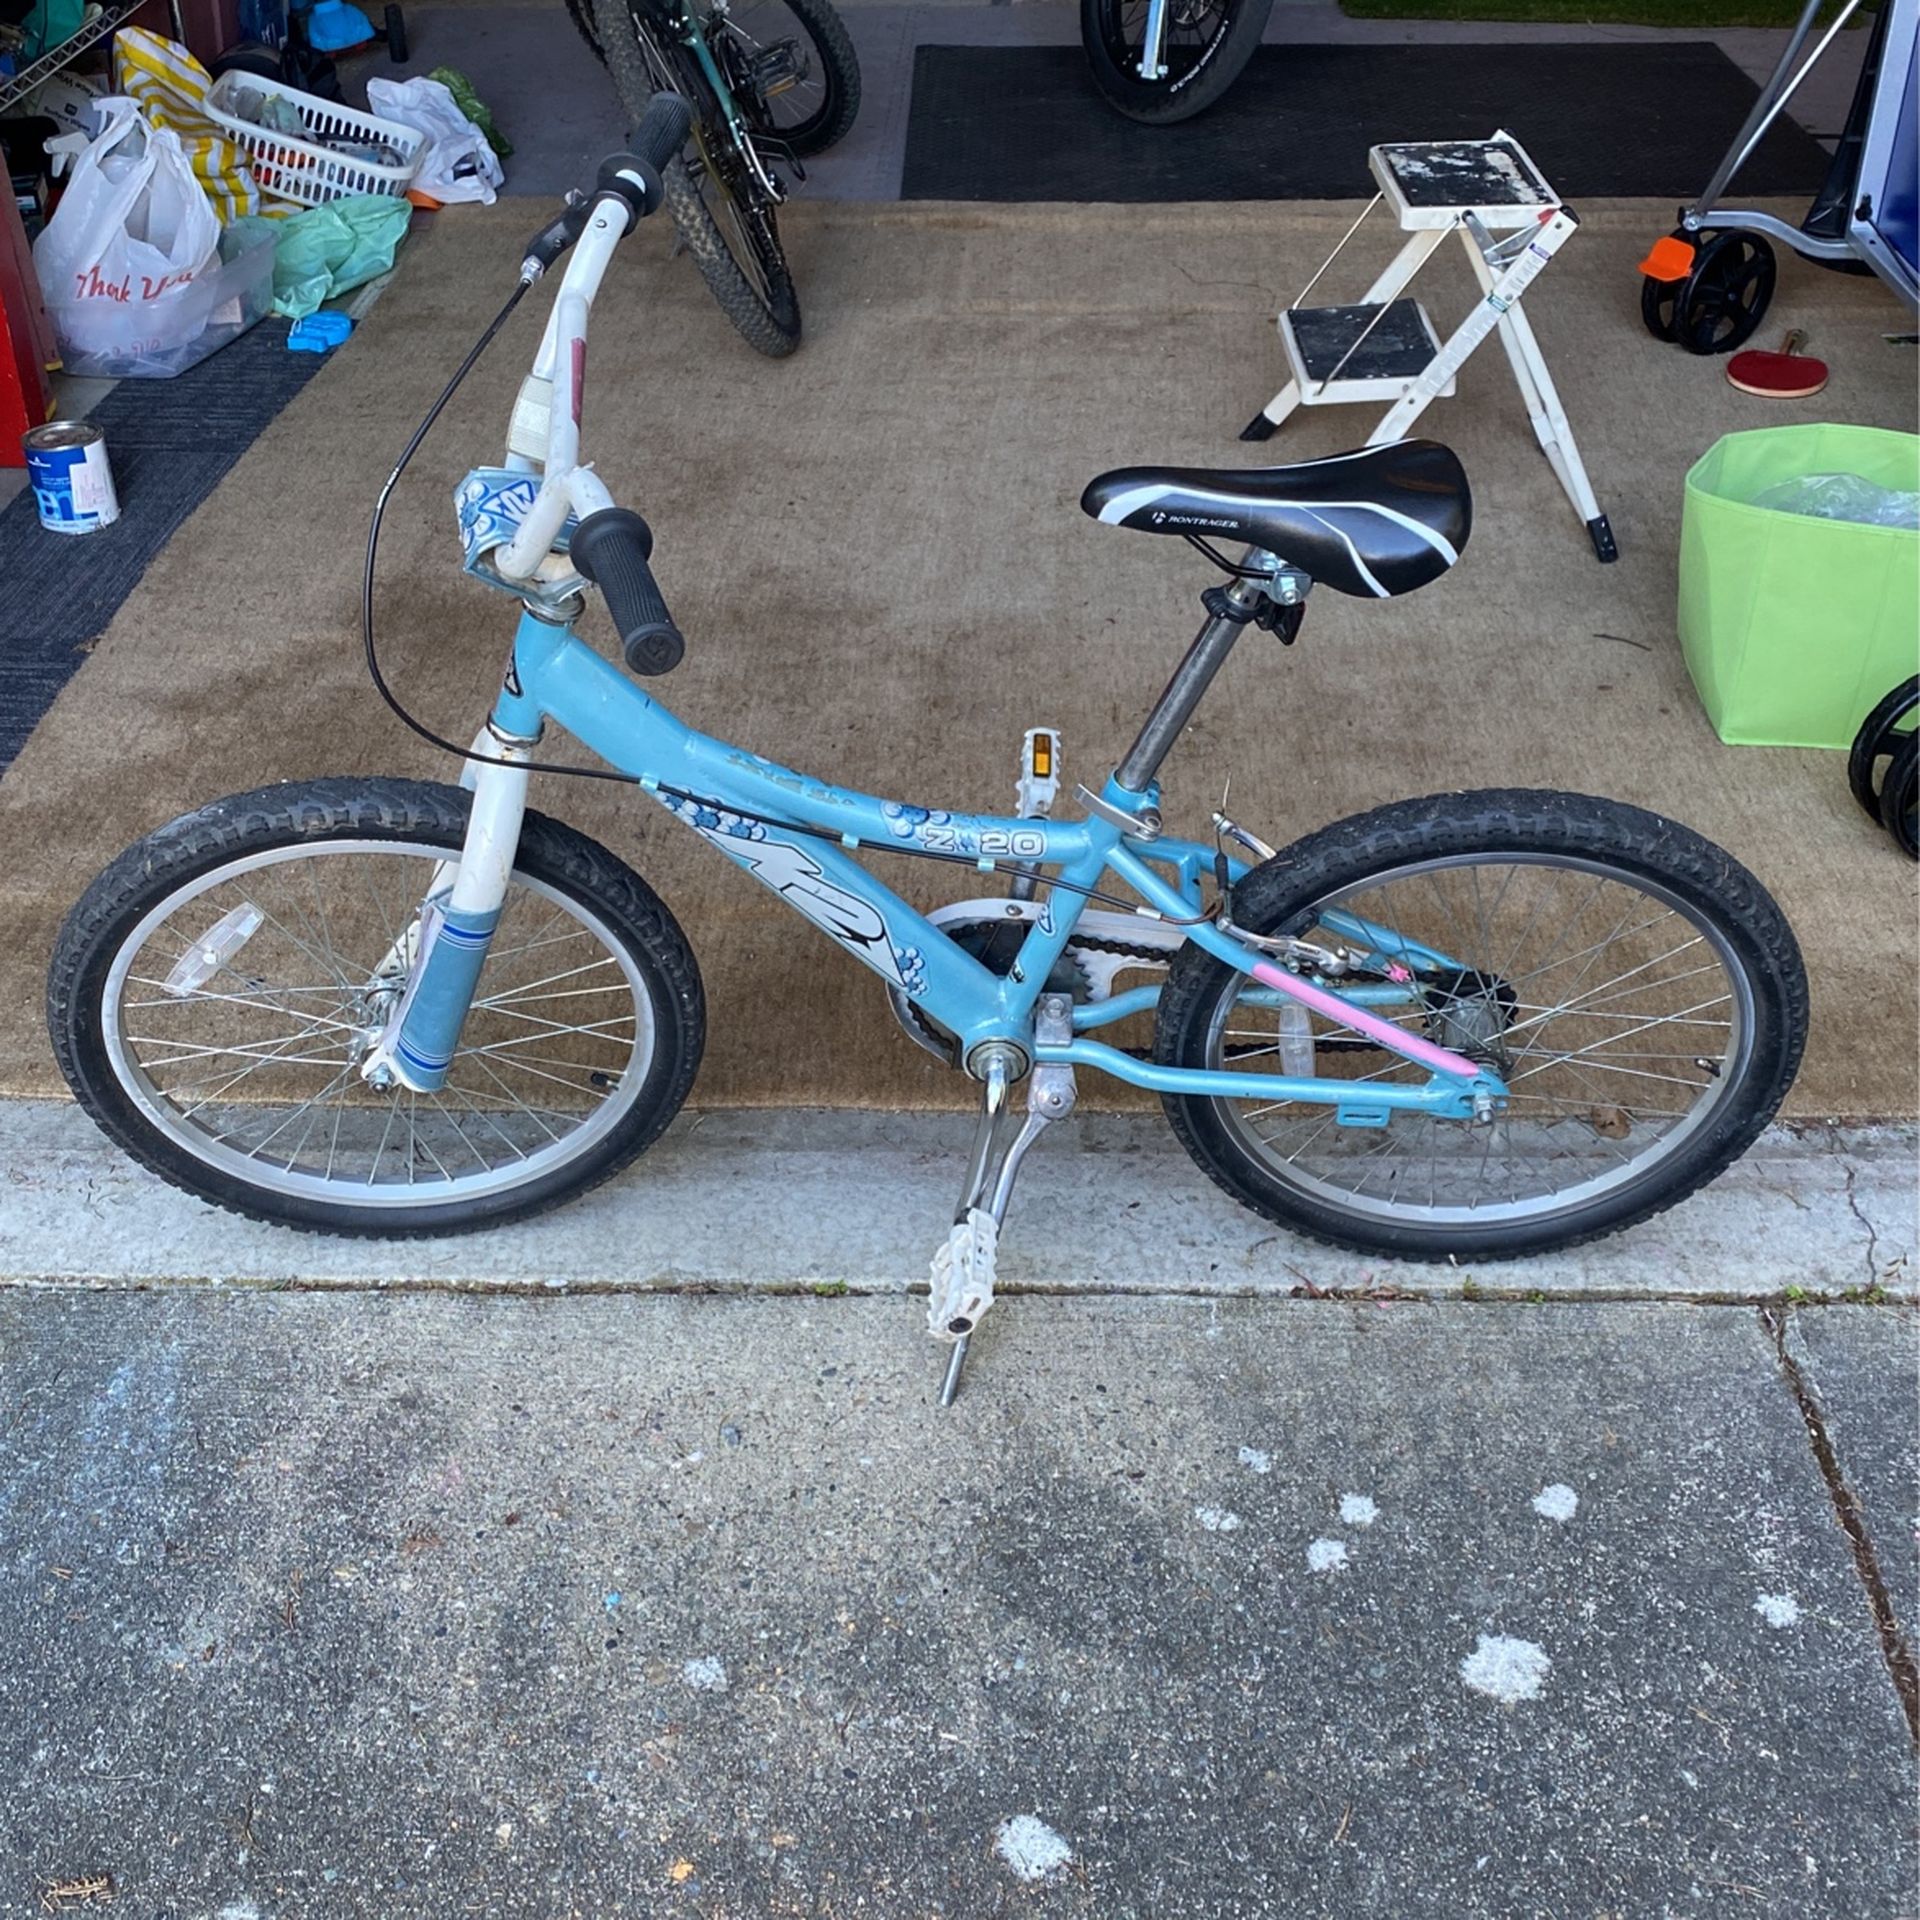 K2 Z20 20” Kids Bike With Hand And Foot Brakes